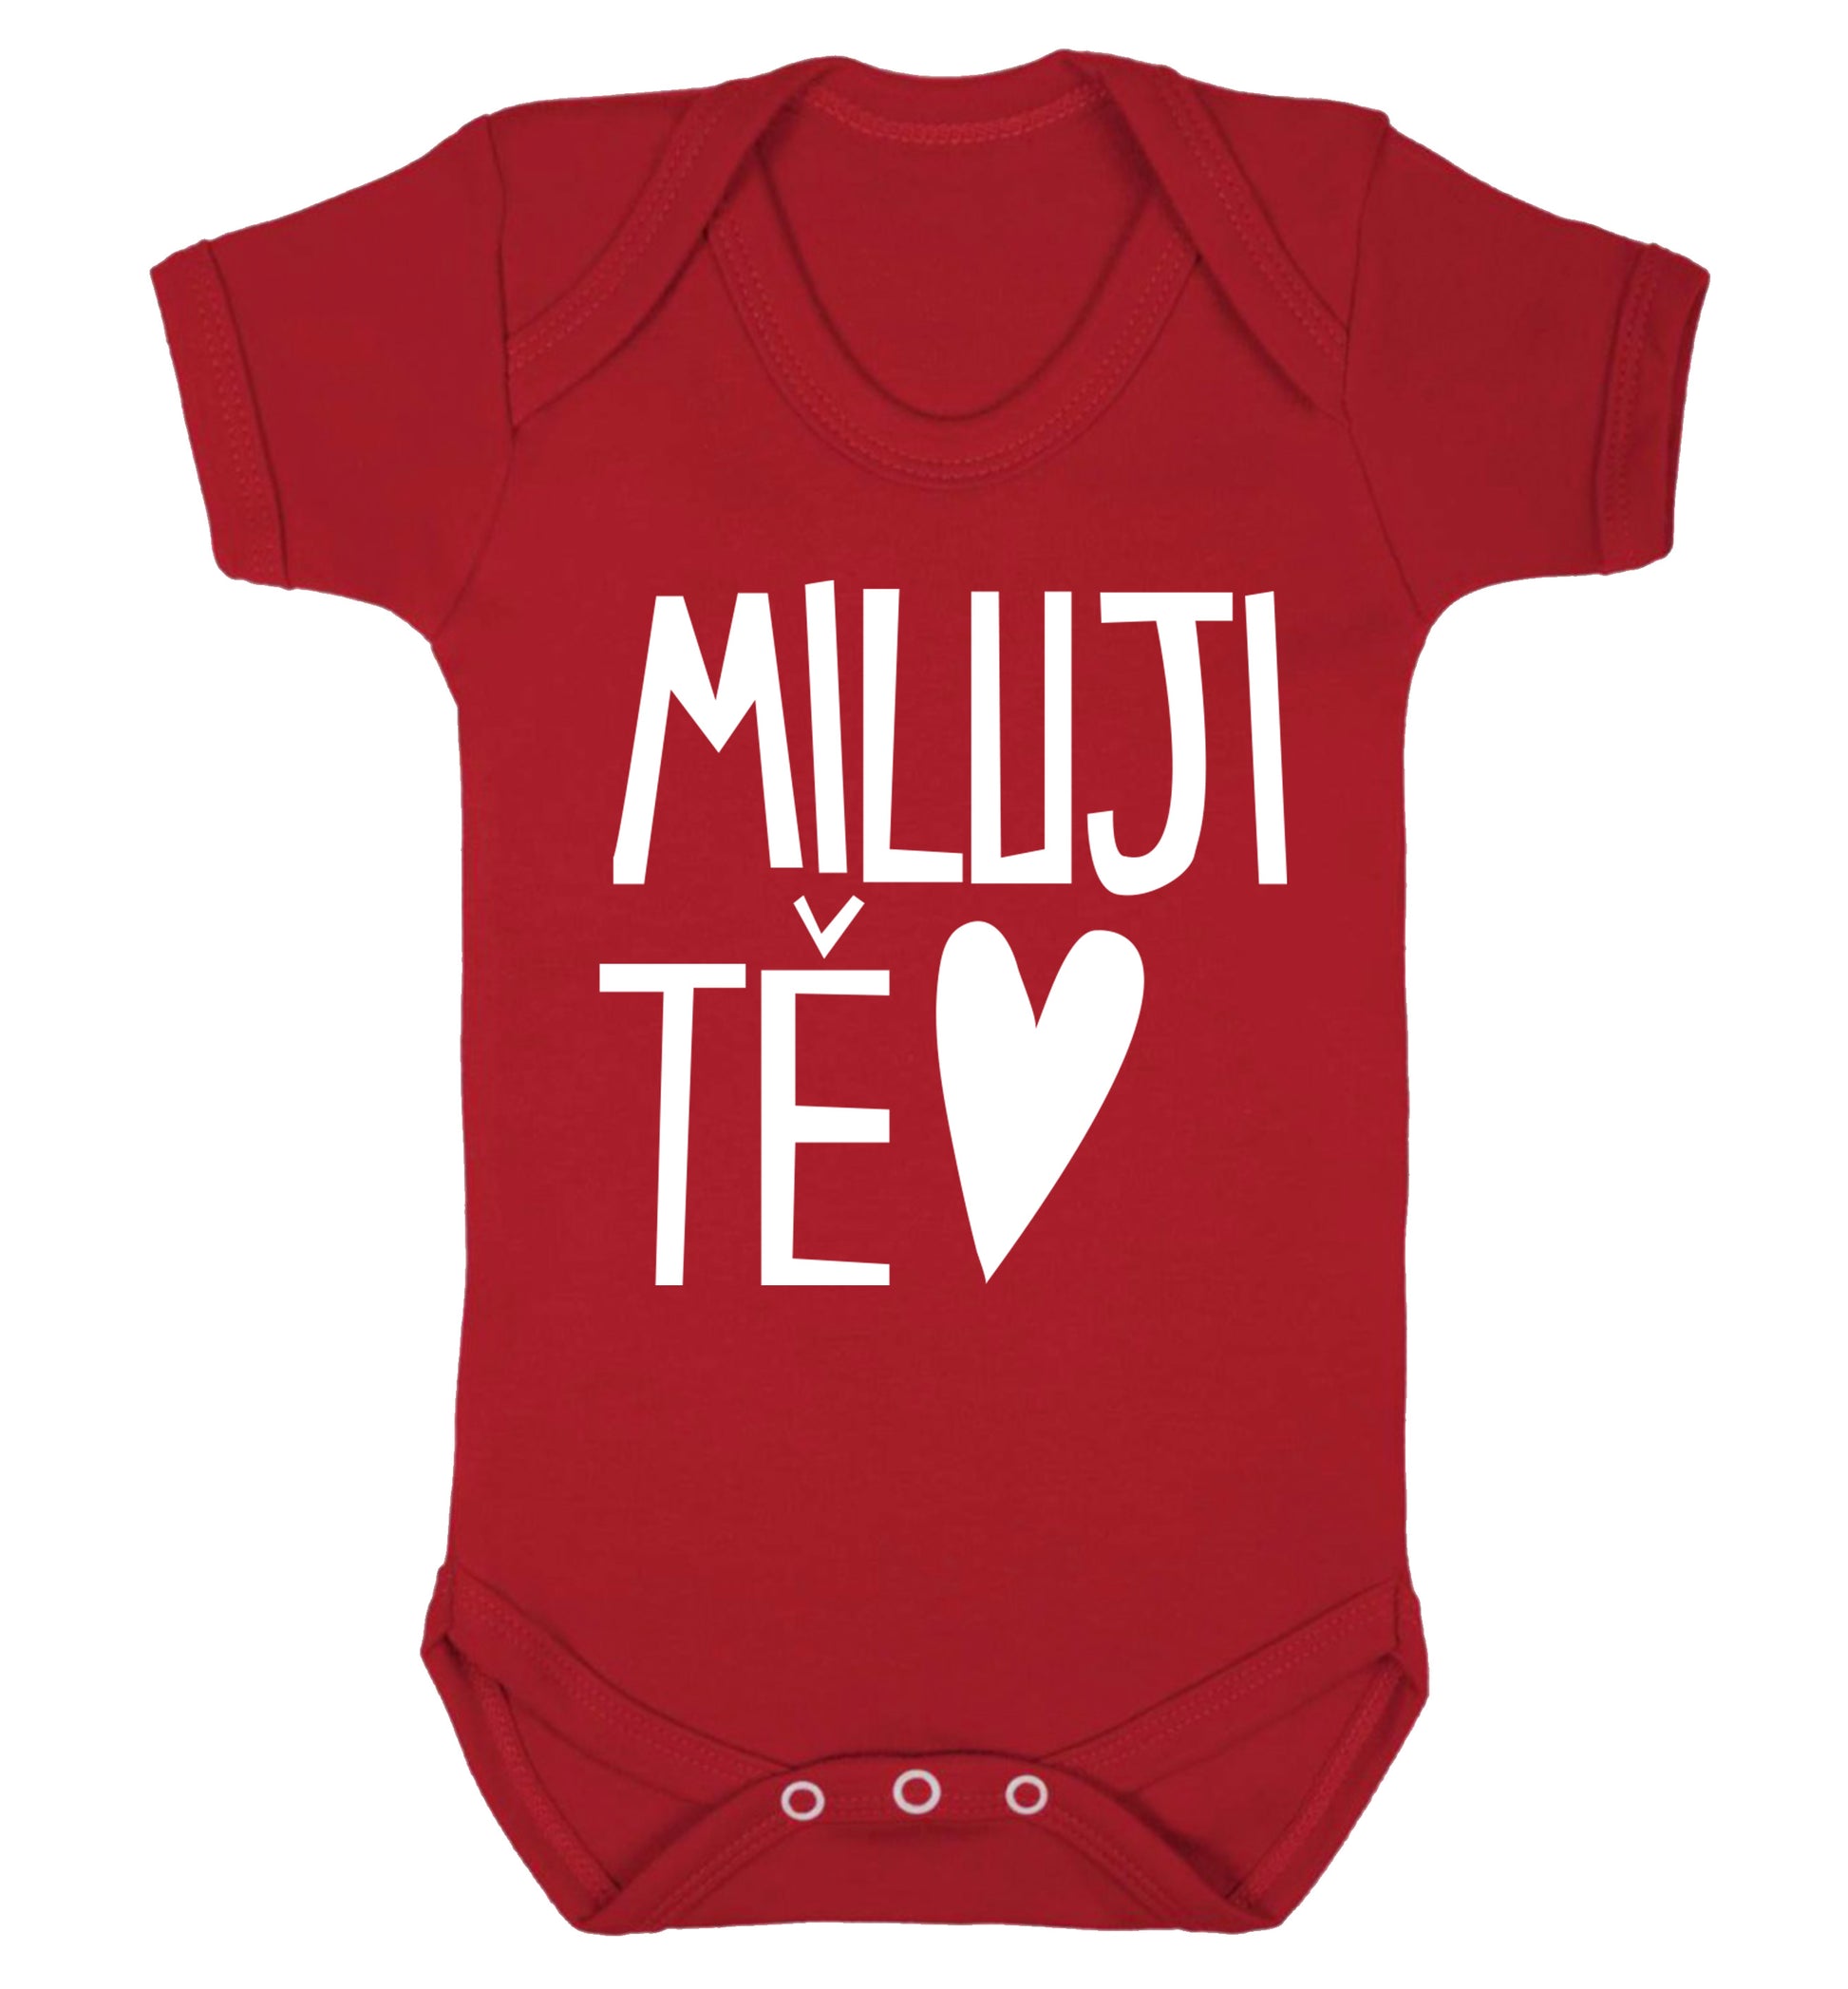 Miluji T_ - I love you Baby Vest red 18-24 months